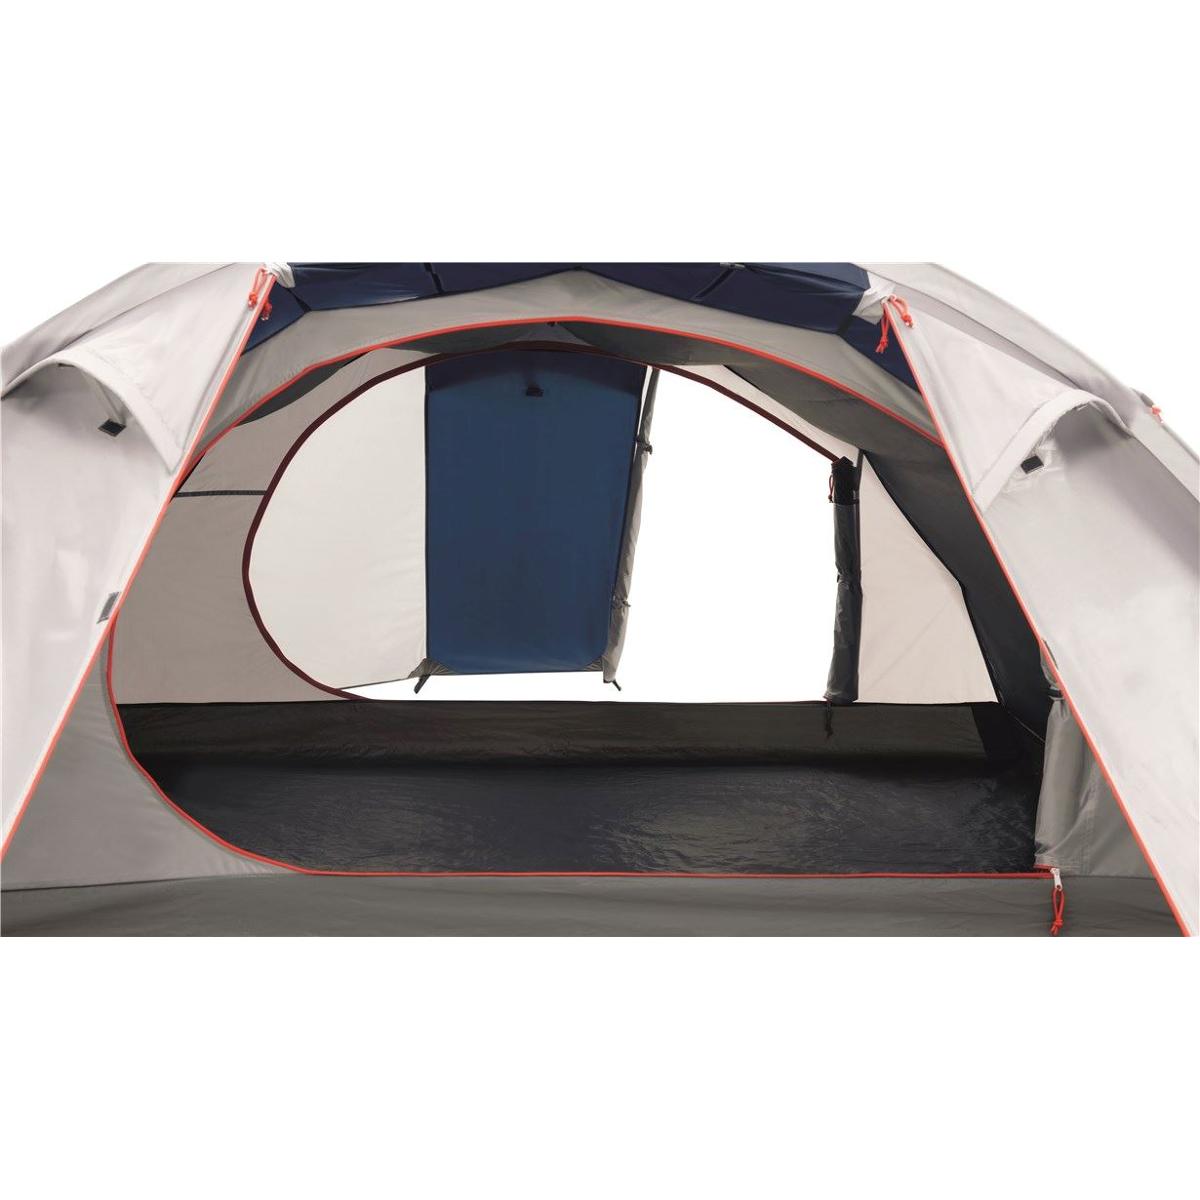 Easy Camp Vega 300 blau bei Tunnelzelt, Campingzubehör Compact Camping 3-Personen, Wagner 240x235cm